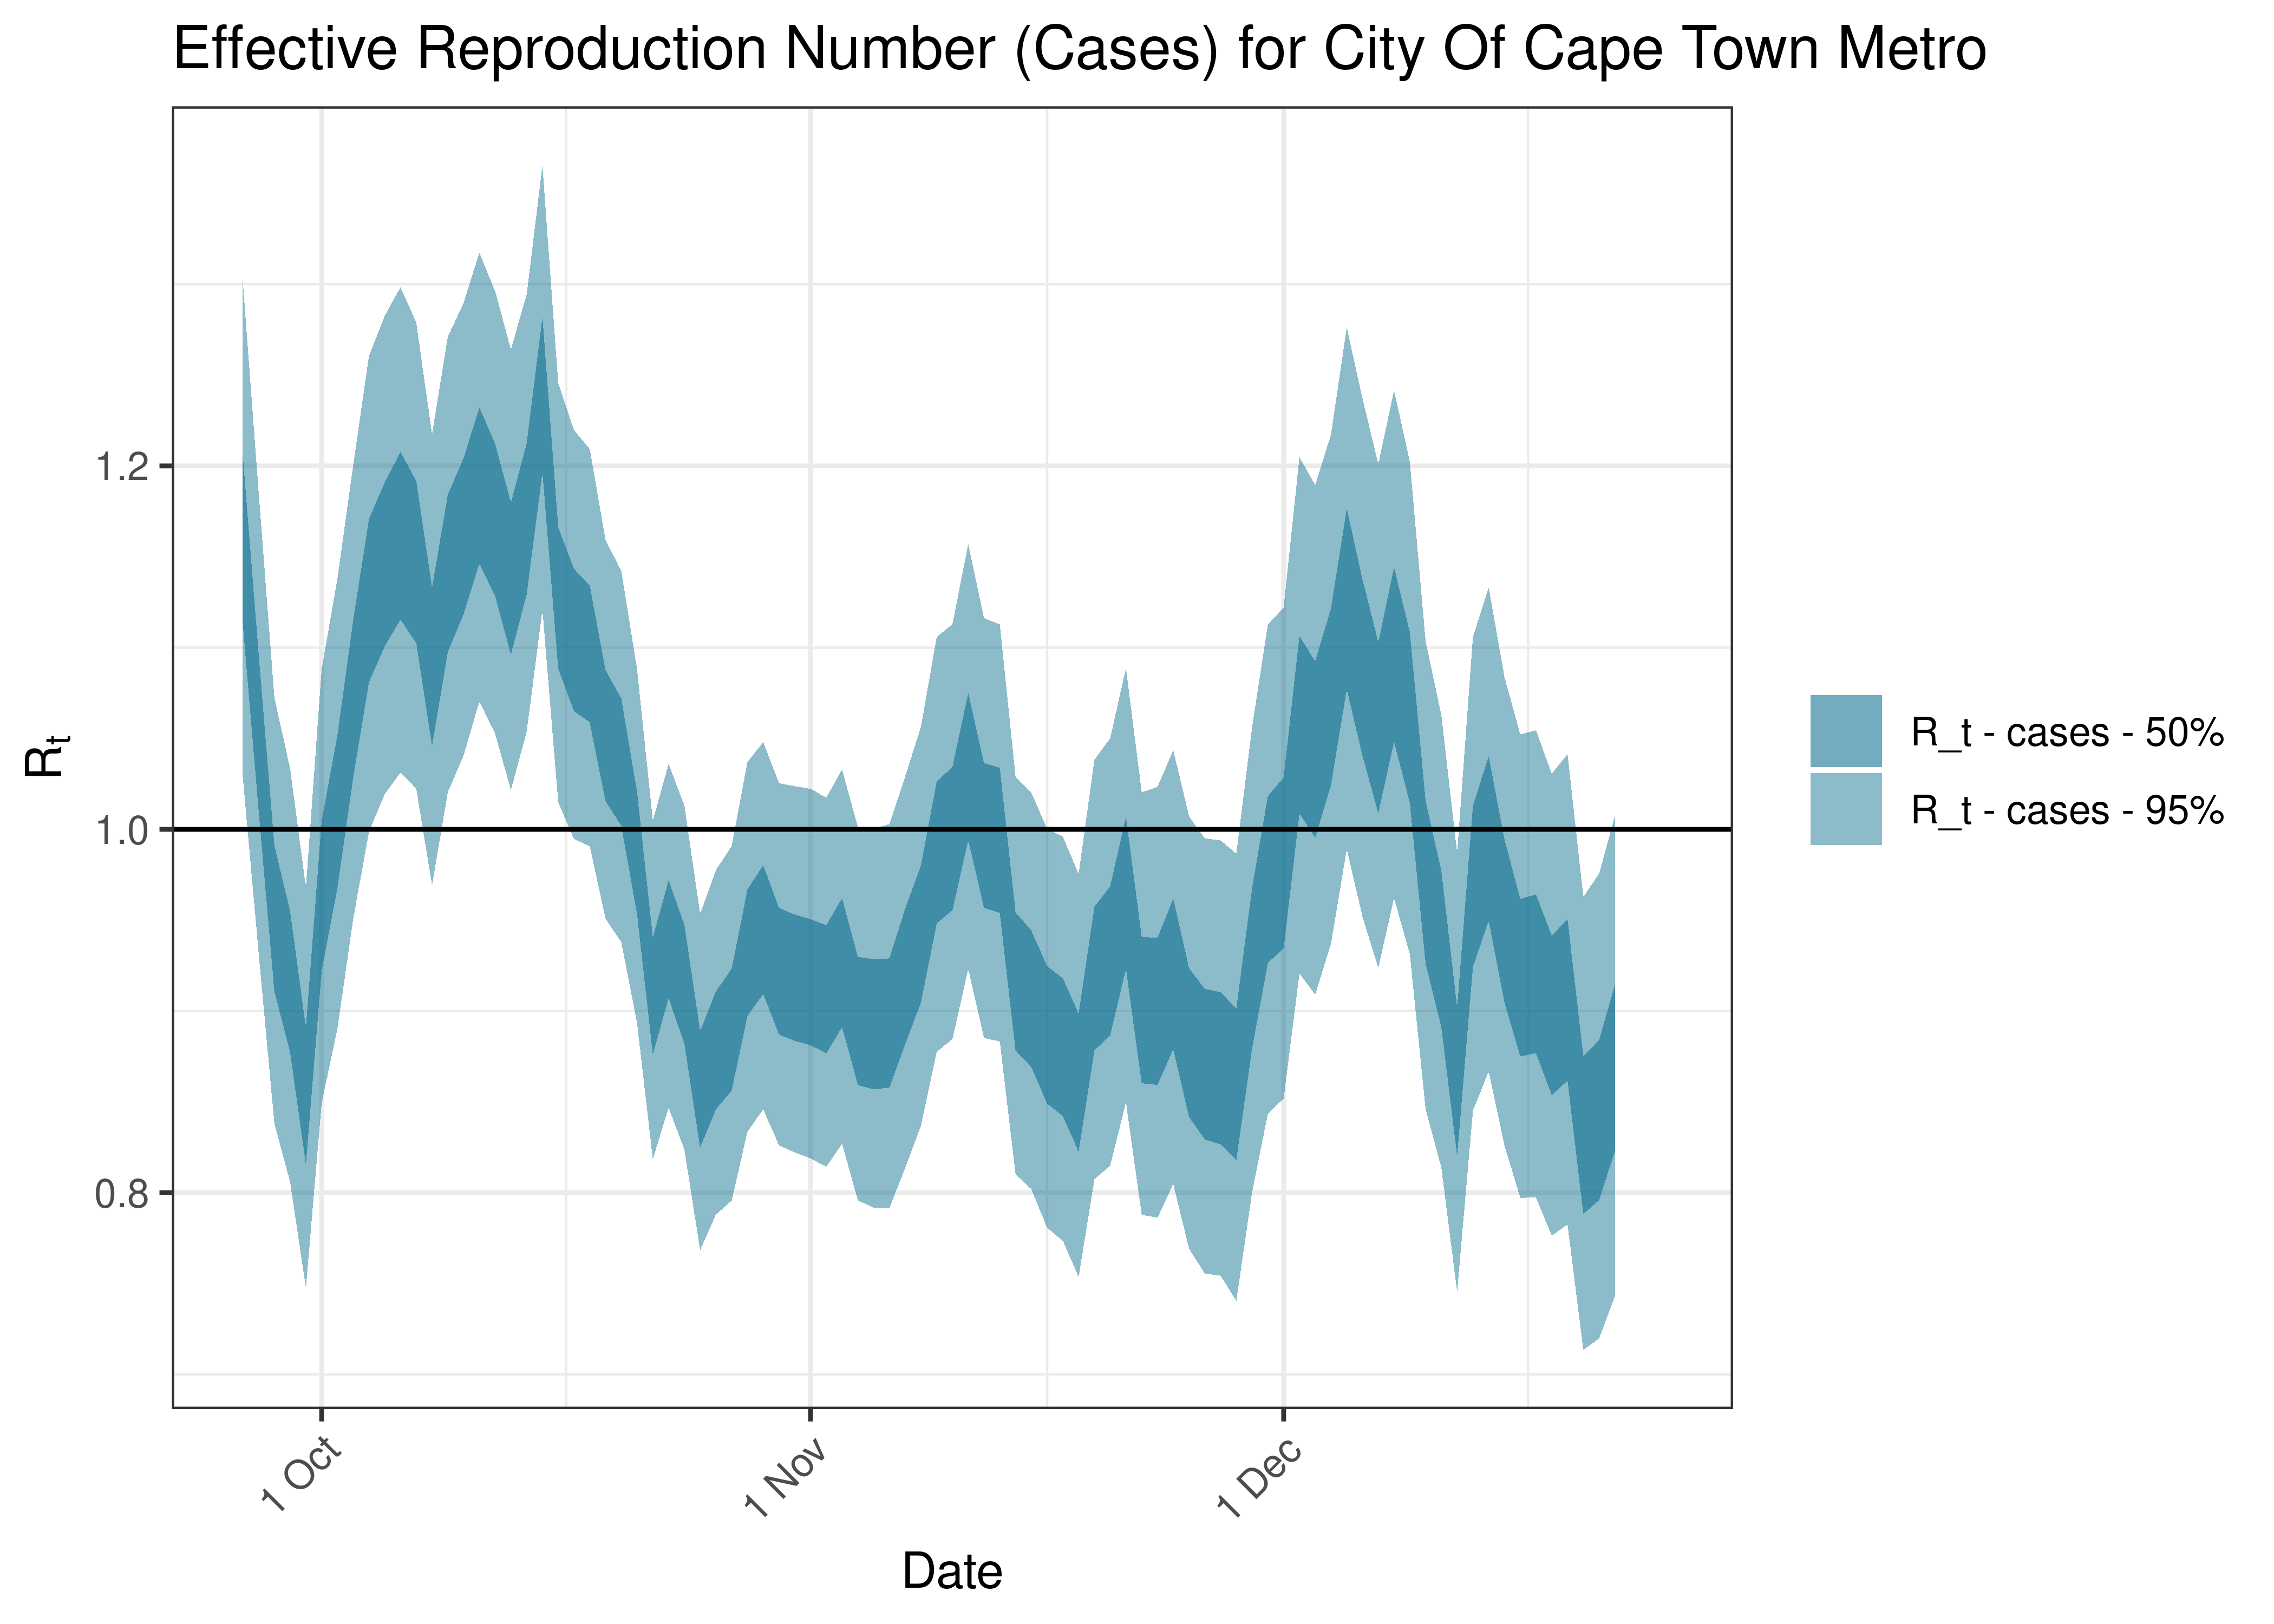 Estimated Effective Reproduction Number Based on Cases for City Of Cape Town Metro over last 90 days